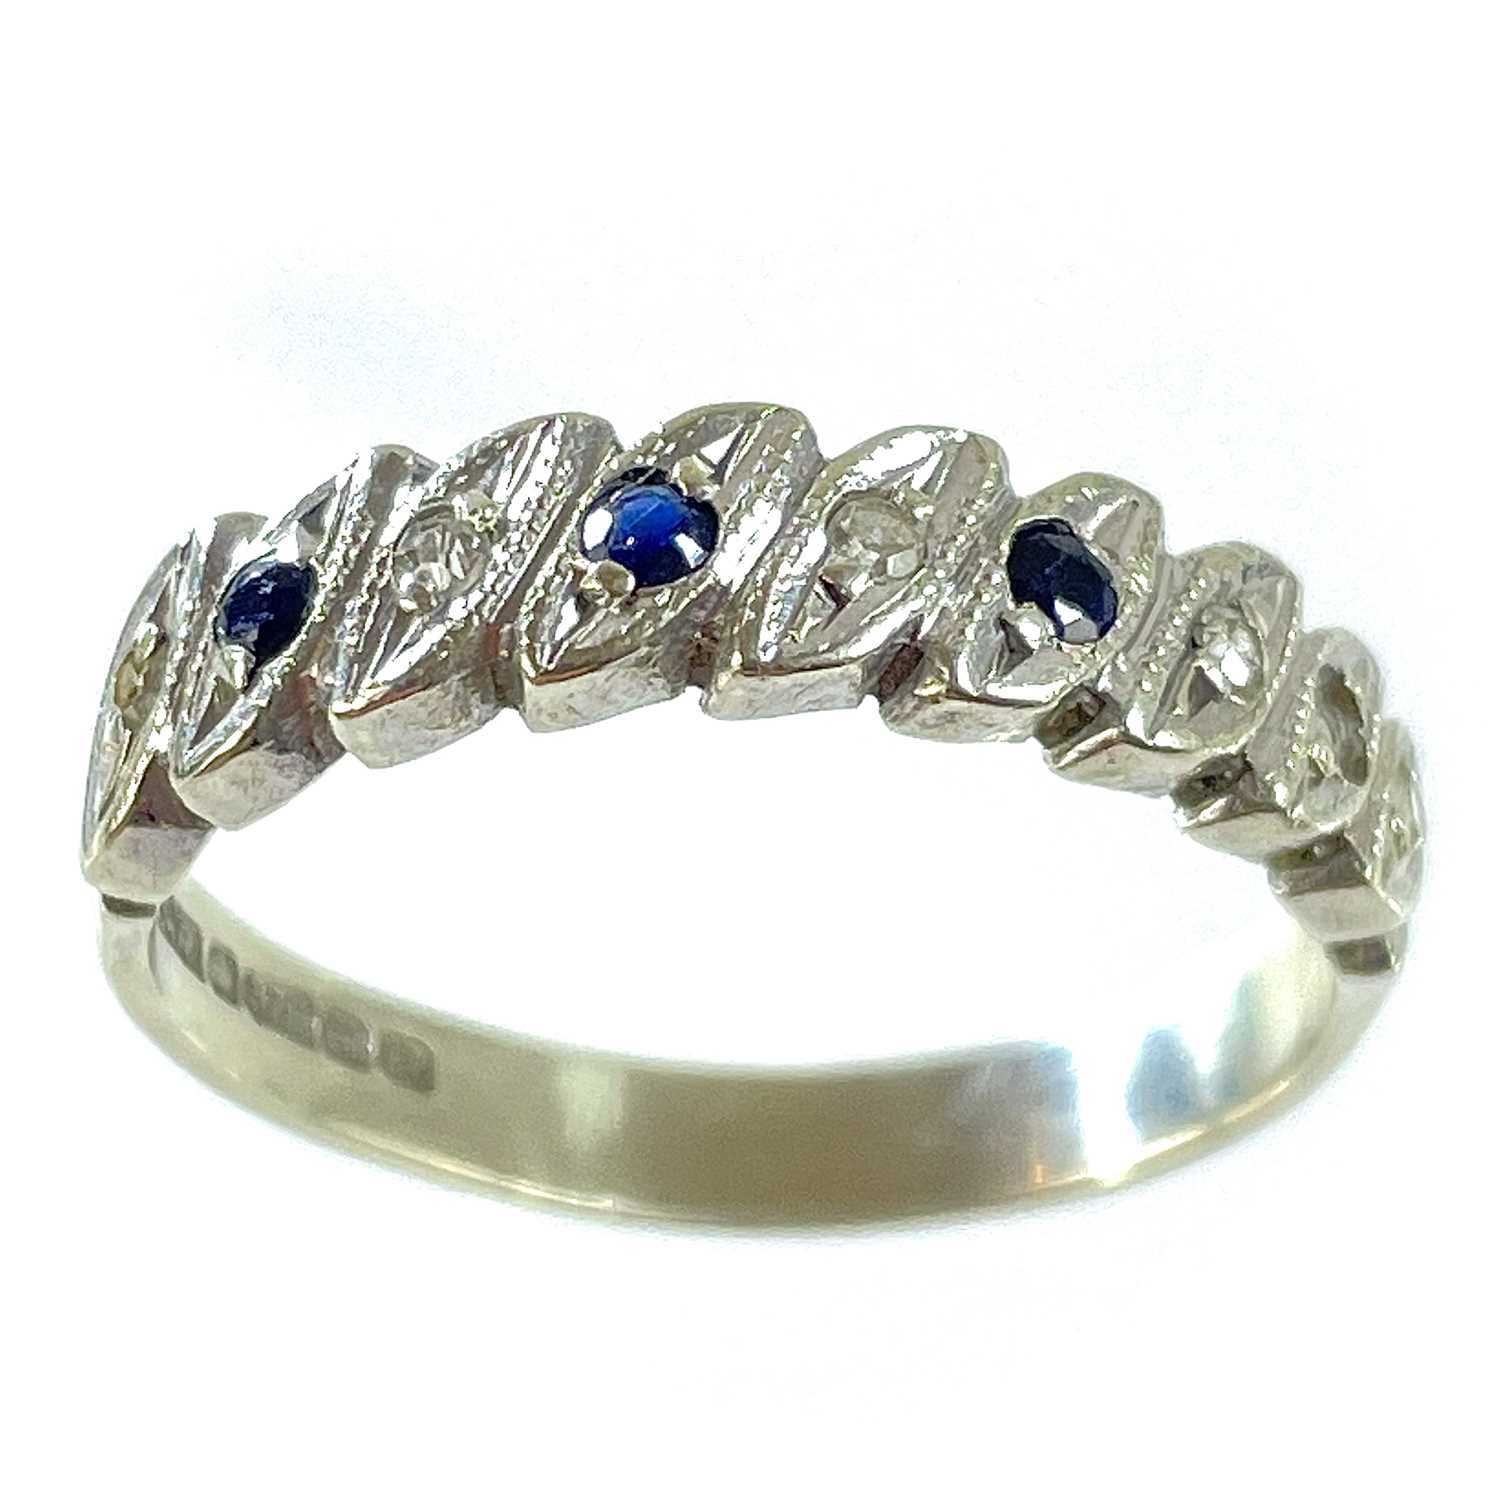 A 9ct white gold diamond and sapphire eight stone set half eternity ring.